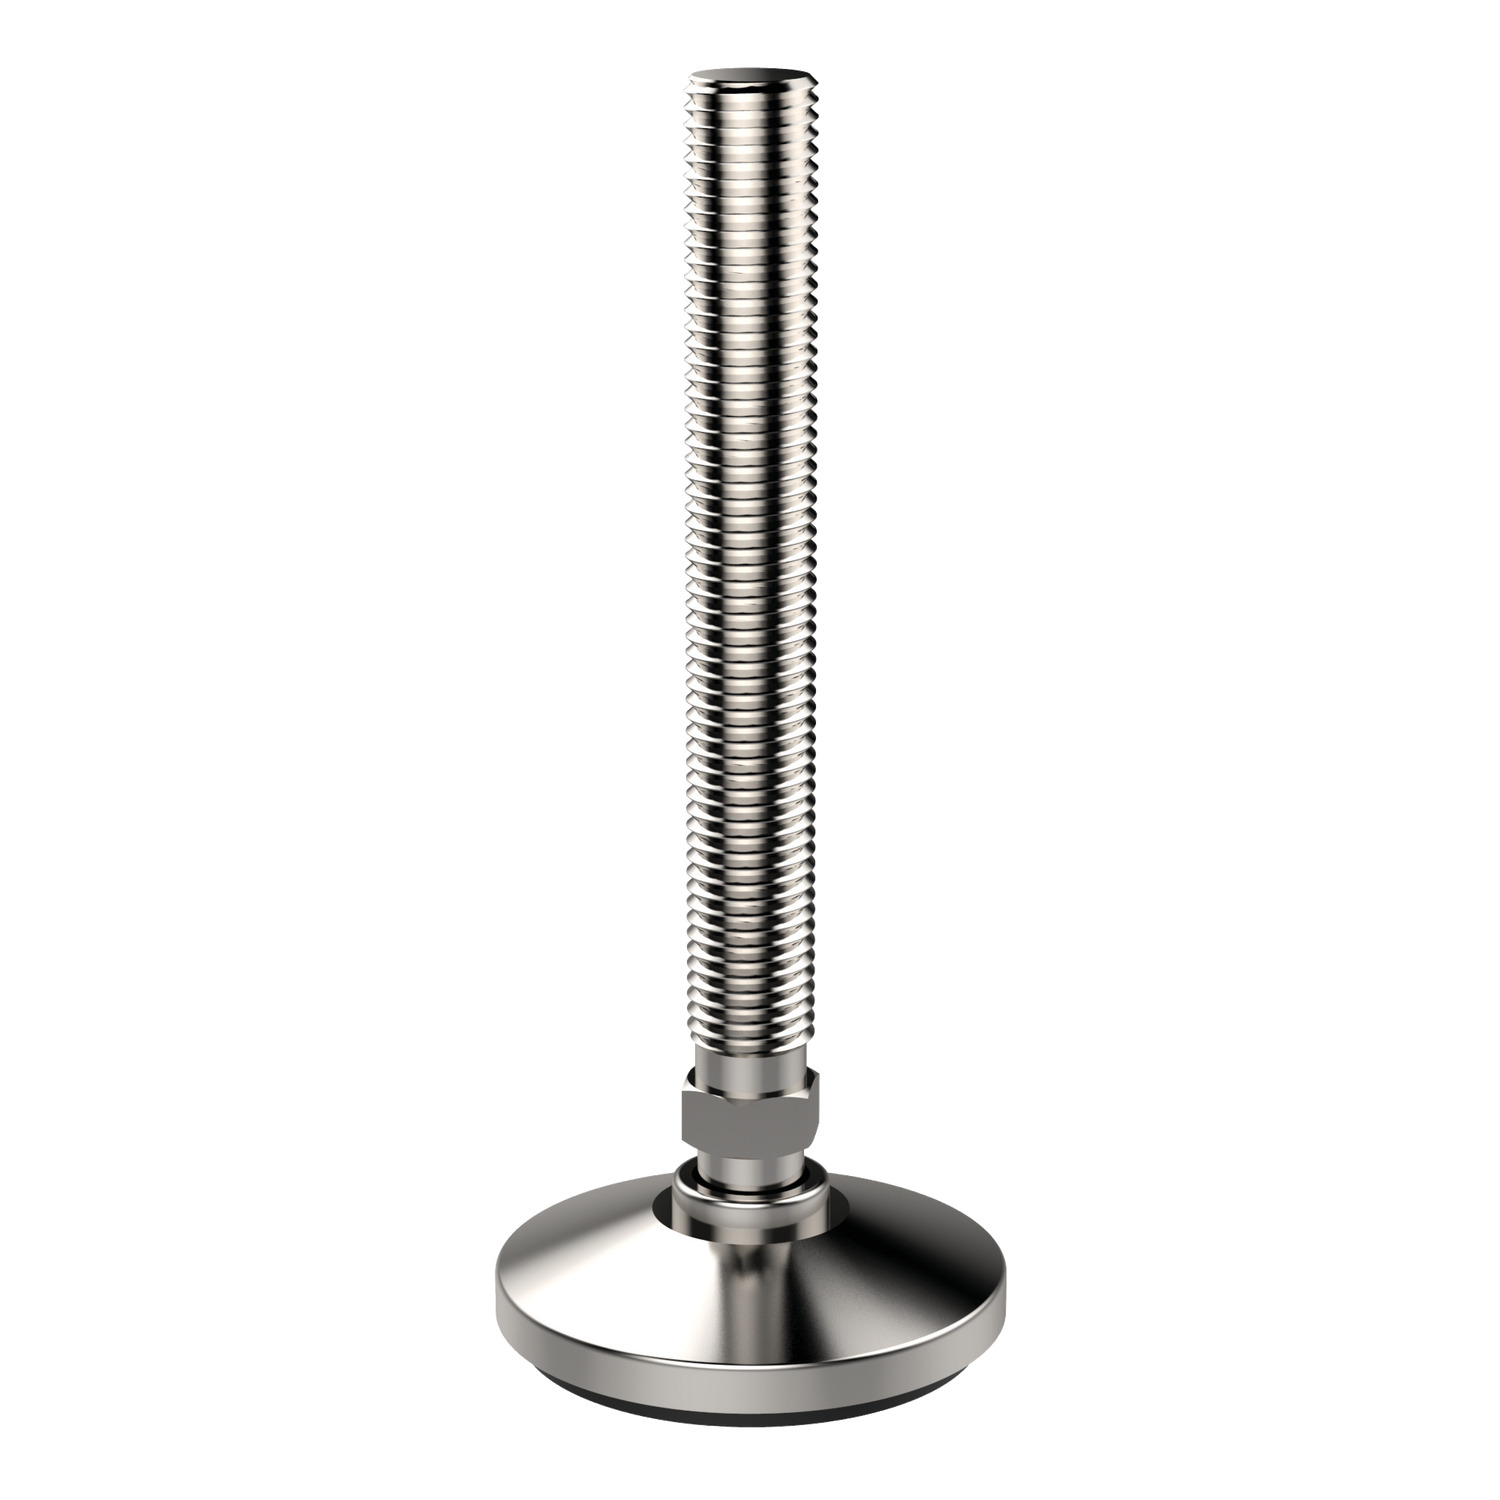 34711.W0161 Levelling Feet Pad & bolt stainless steel - M16 - 125. Also known as W4100.AC0161